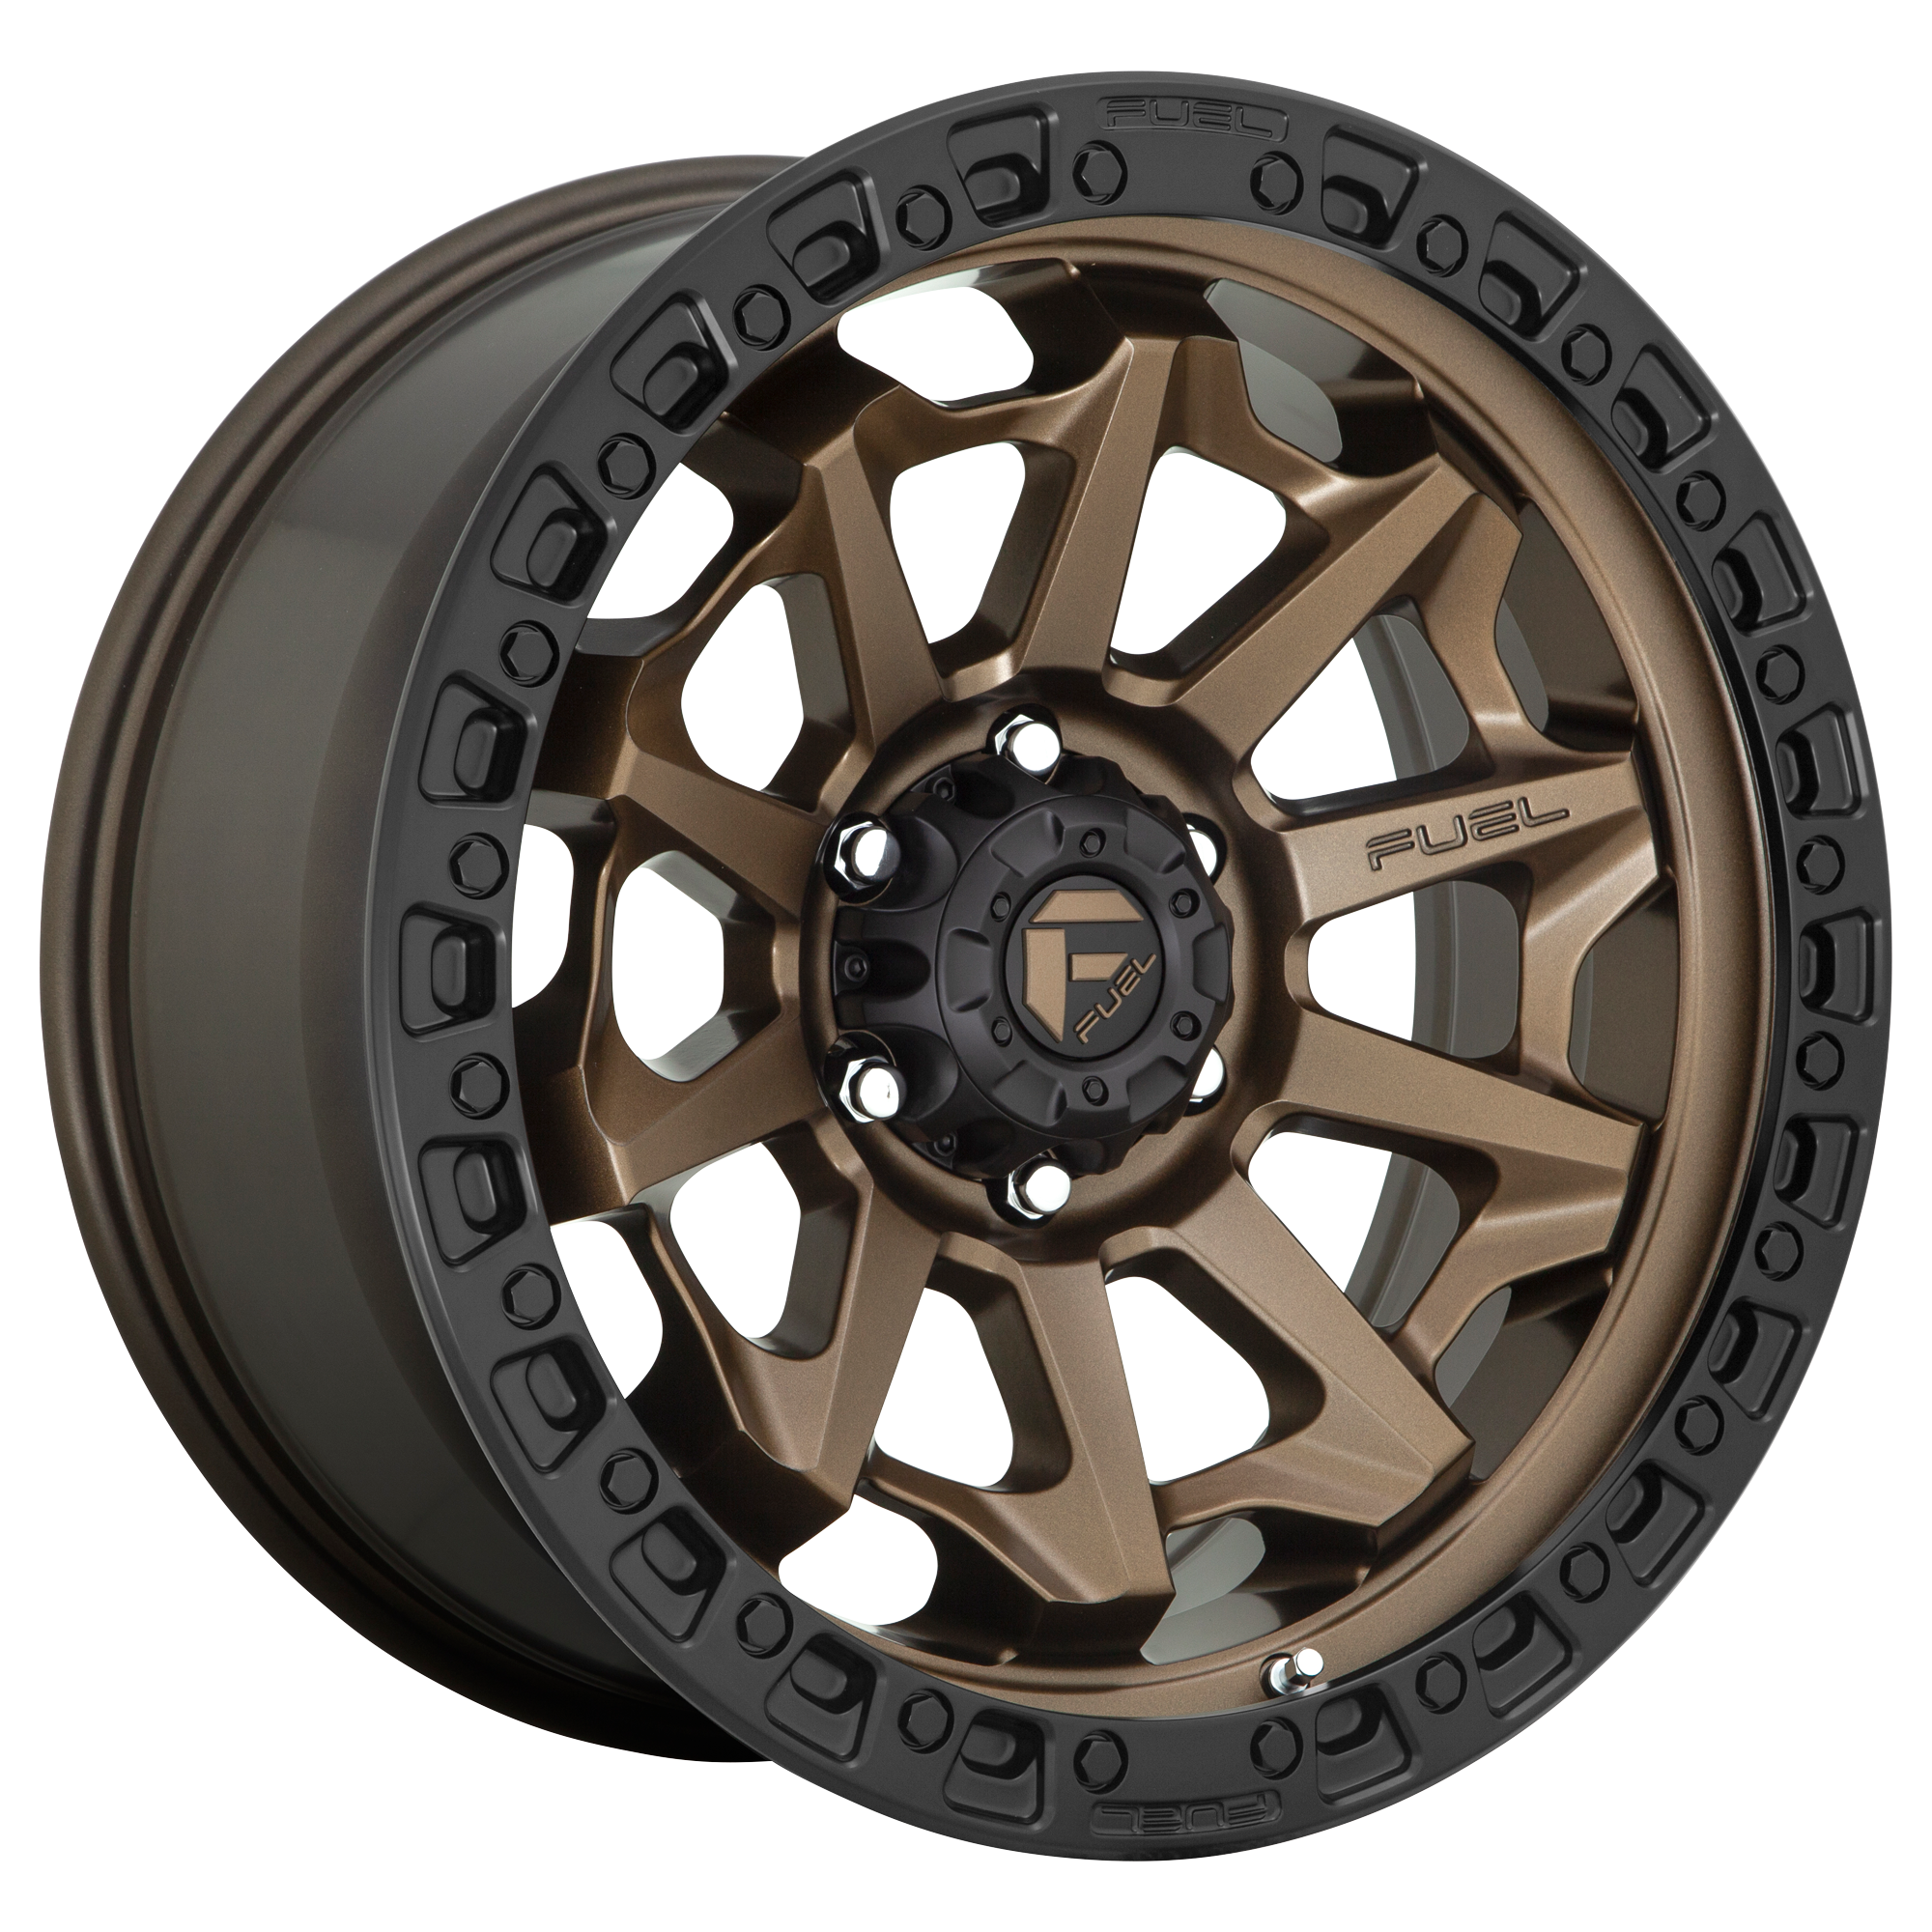 COVERT 20x9 8x165.10 MATTE BRONZE BLACK BEAD RING (20 mm) - Tires and Engine Performance